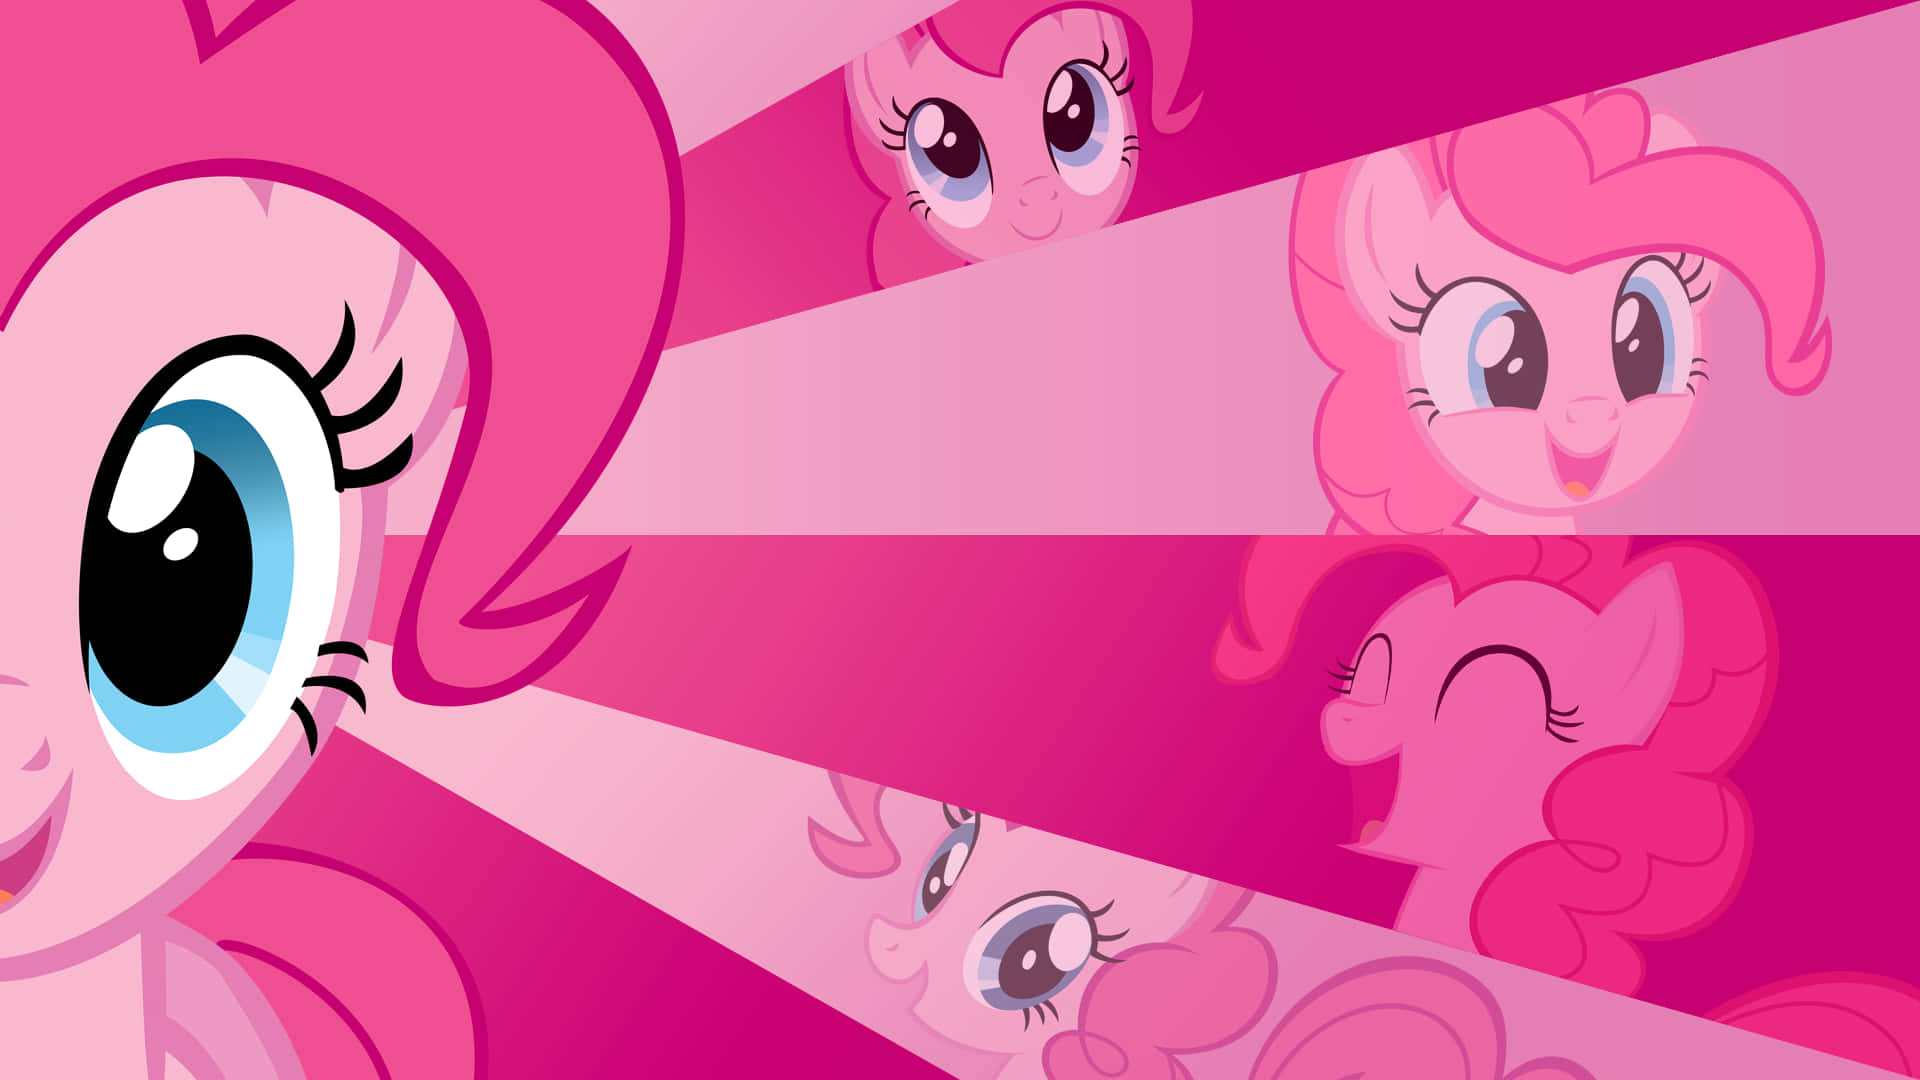 Celebrating Friendship and Laughter with Pinkie Pie